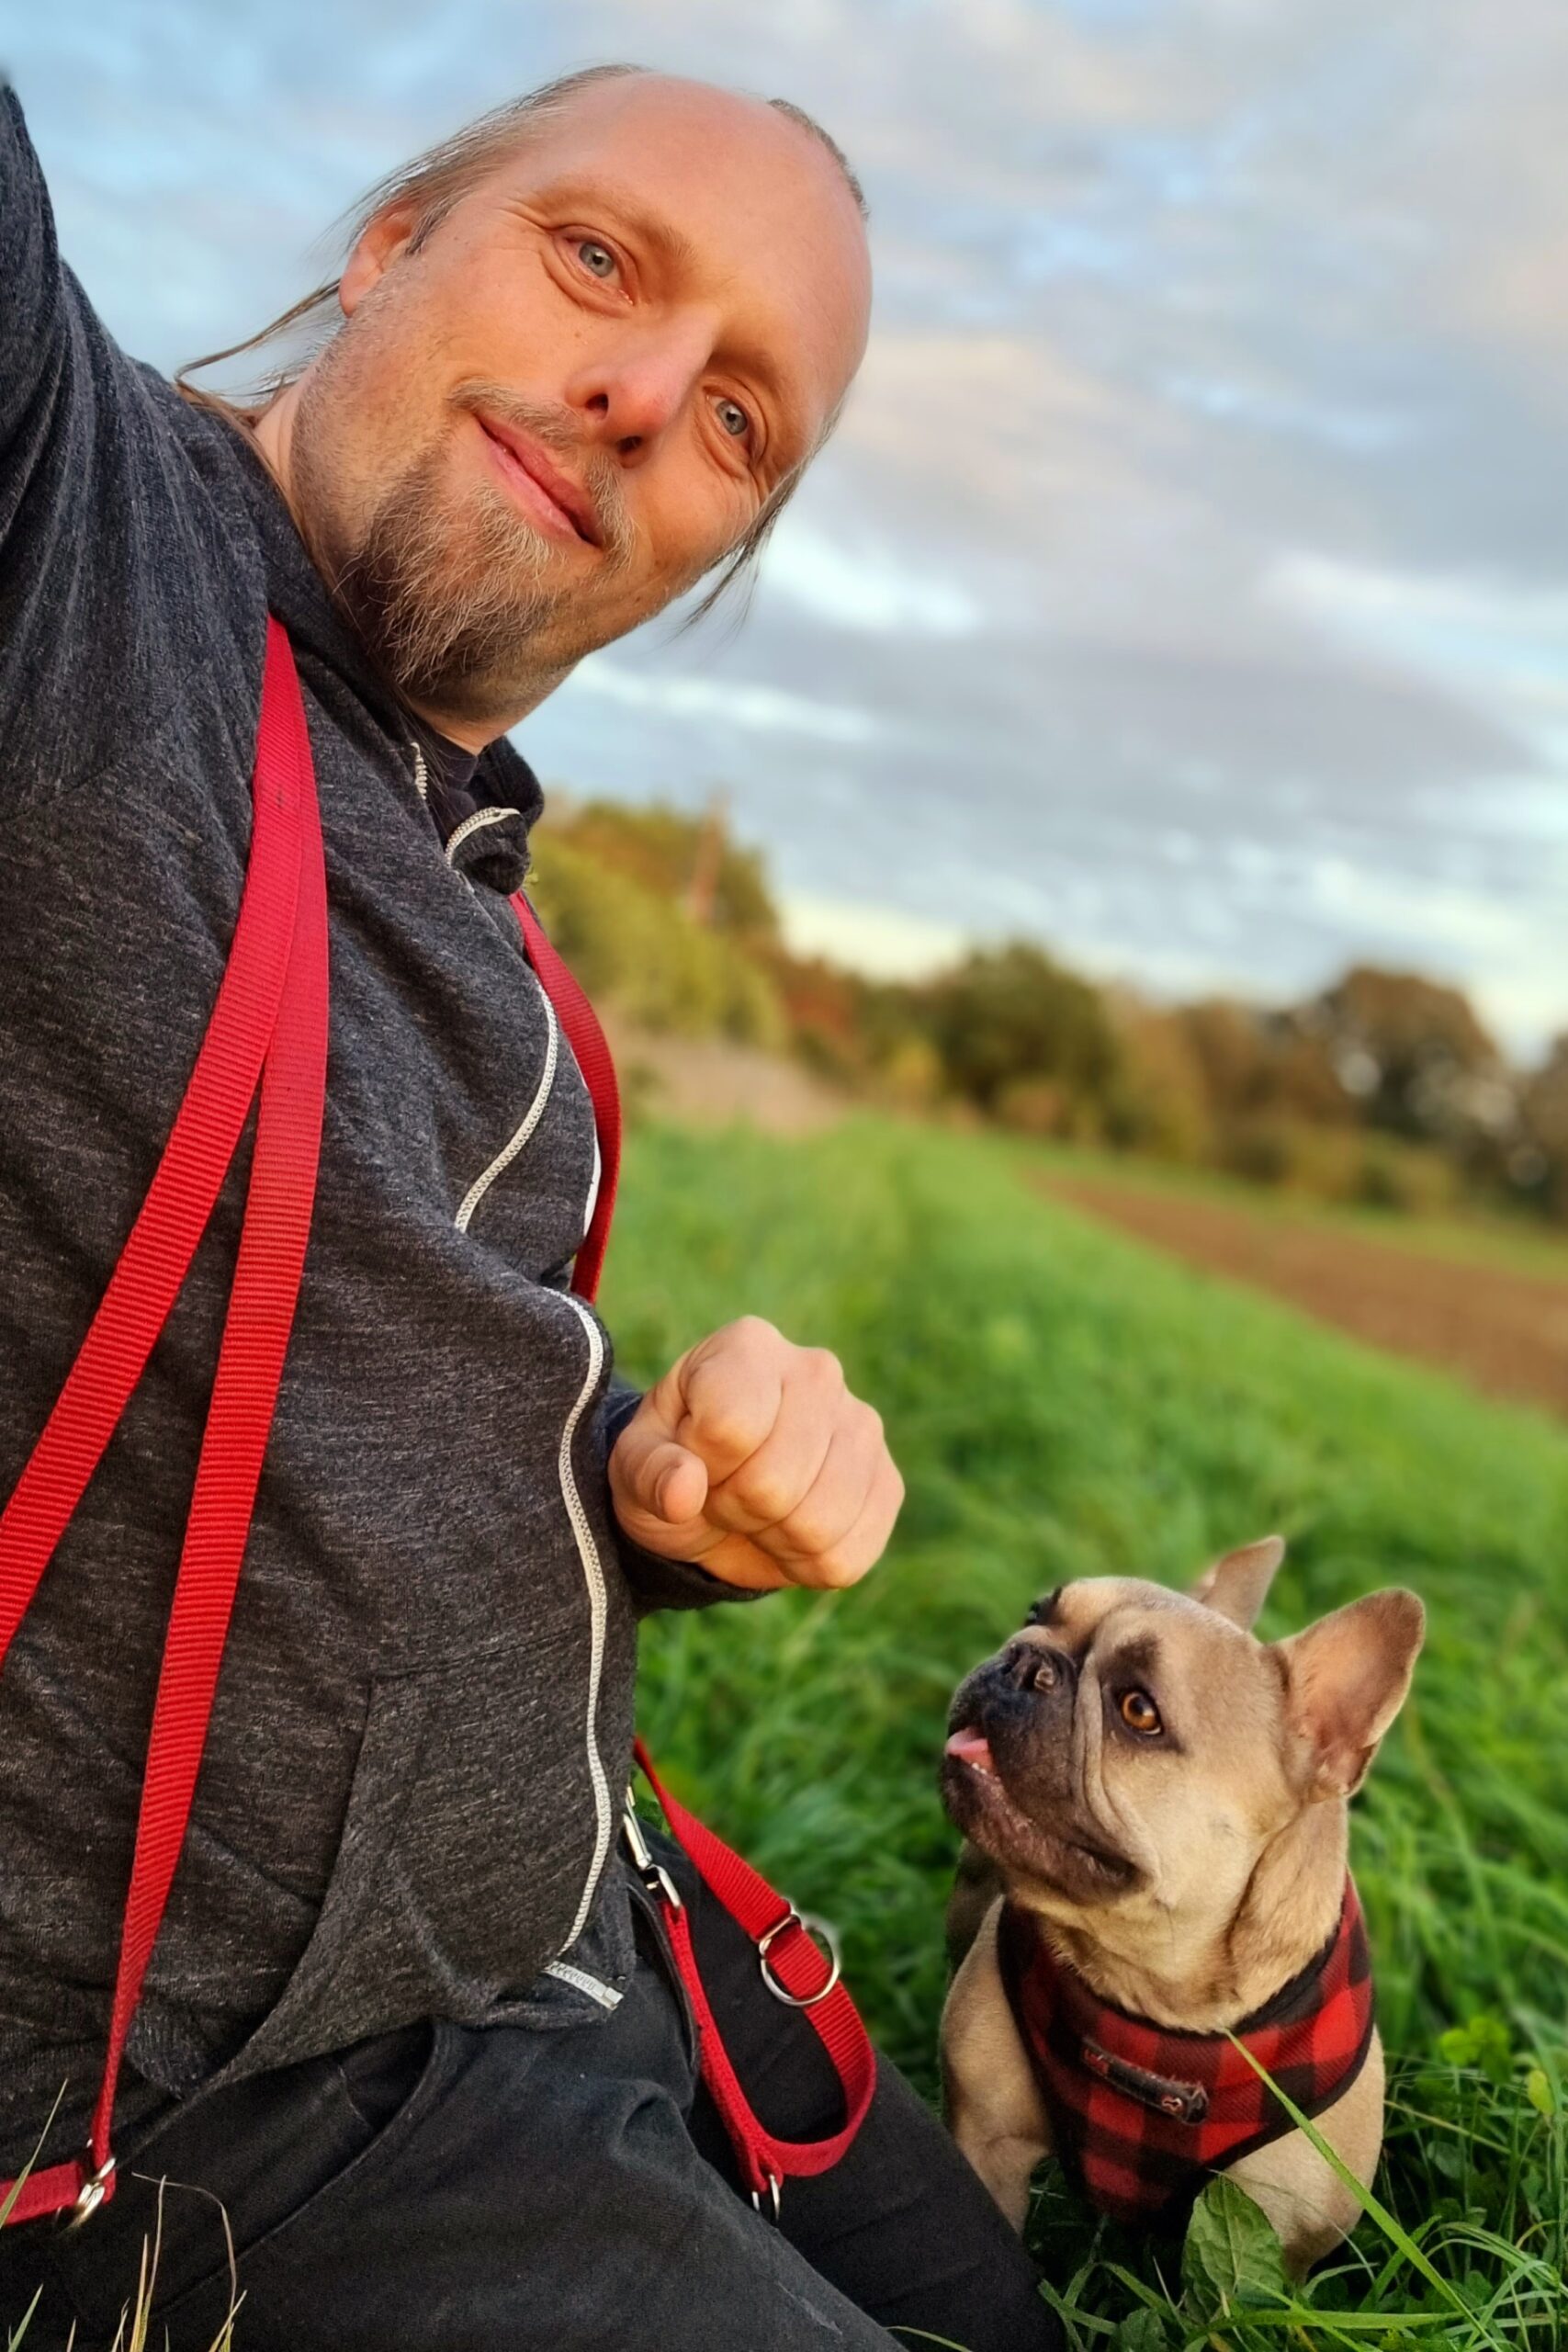 Dan kneels in the grassy verge of a recently-ploughed field in late-afternoon summer sunshine, a long red dog's lead hanging around his shoulders. By his side, a champagne French Bulldog looks with anticipation up at him (or possibly at his closed fist).